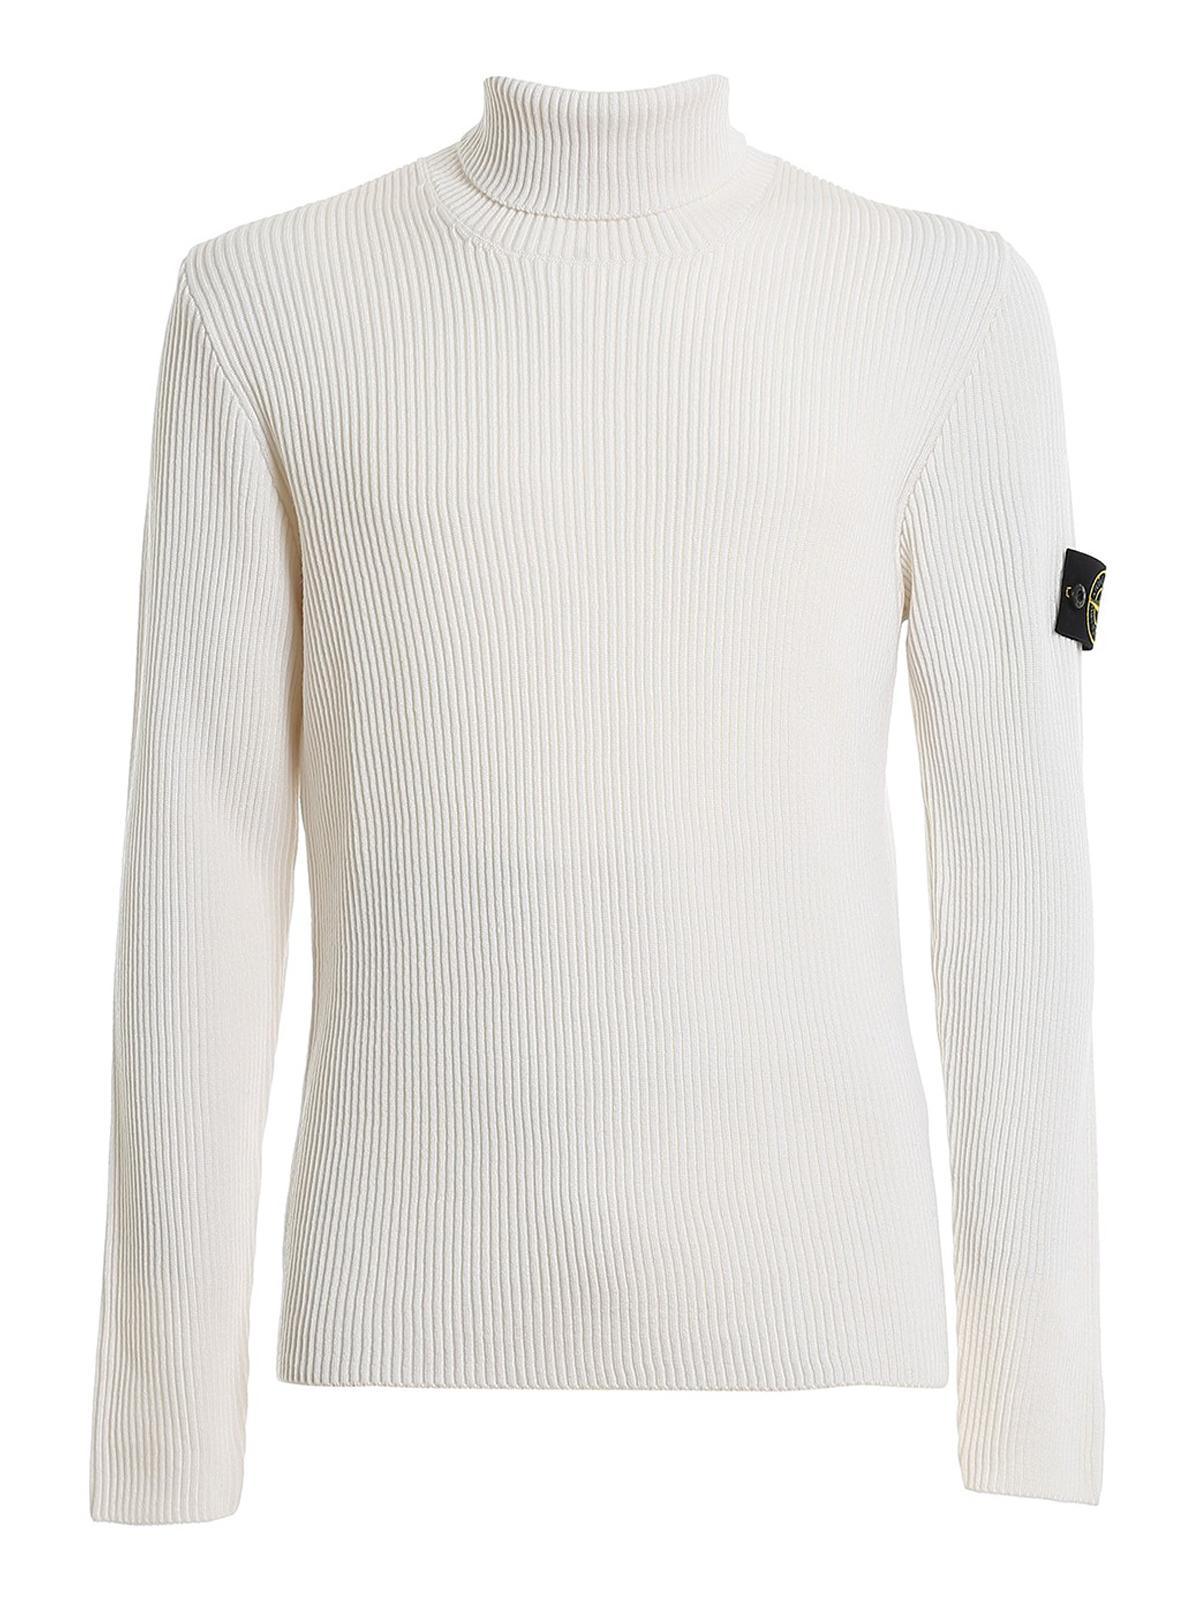 Stone Island Ribbed Wool Turtleneck Sweater in White for Men - Lyst